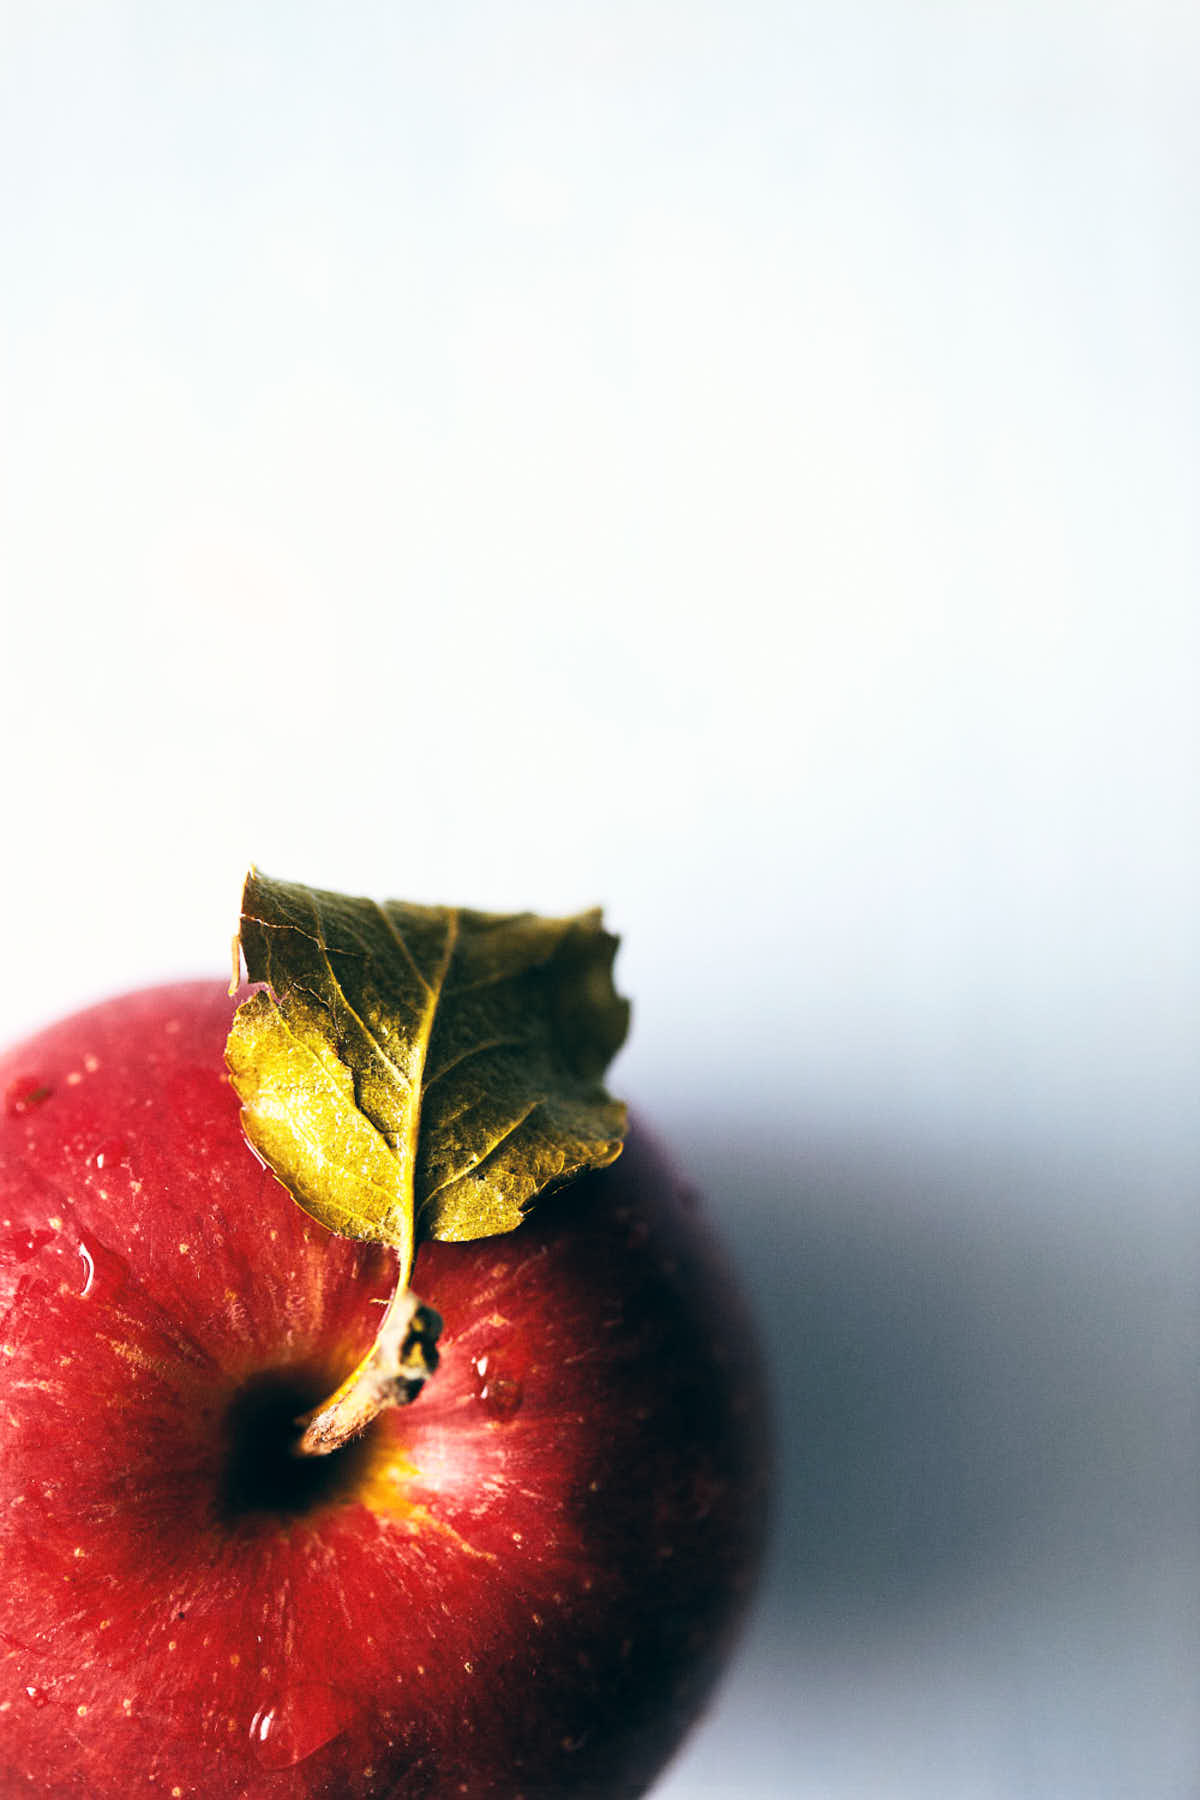 Close up of red apple with leaf still attached